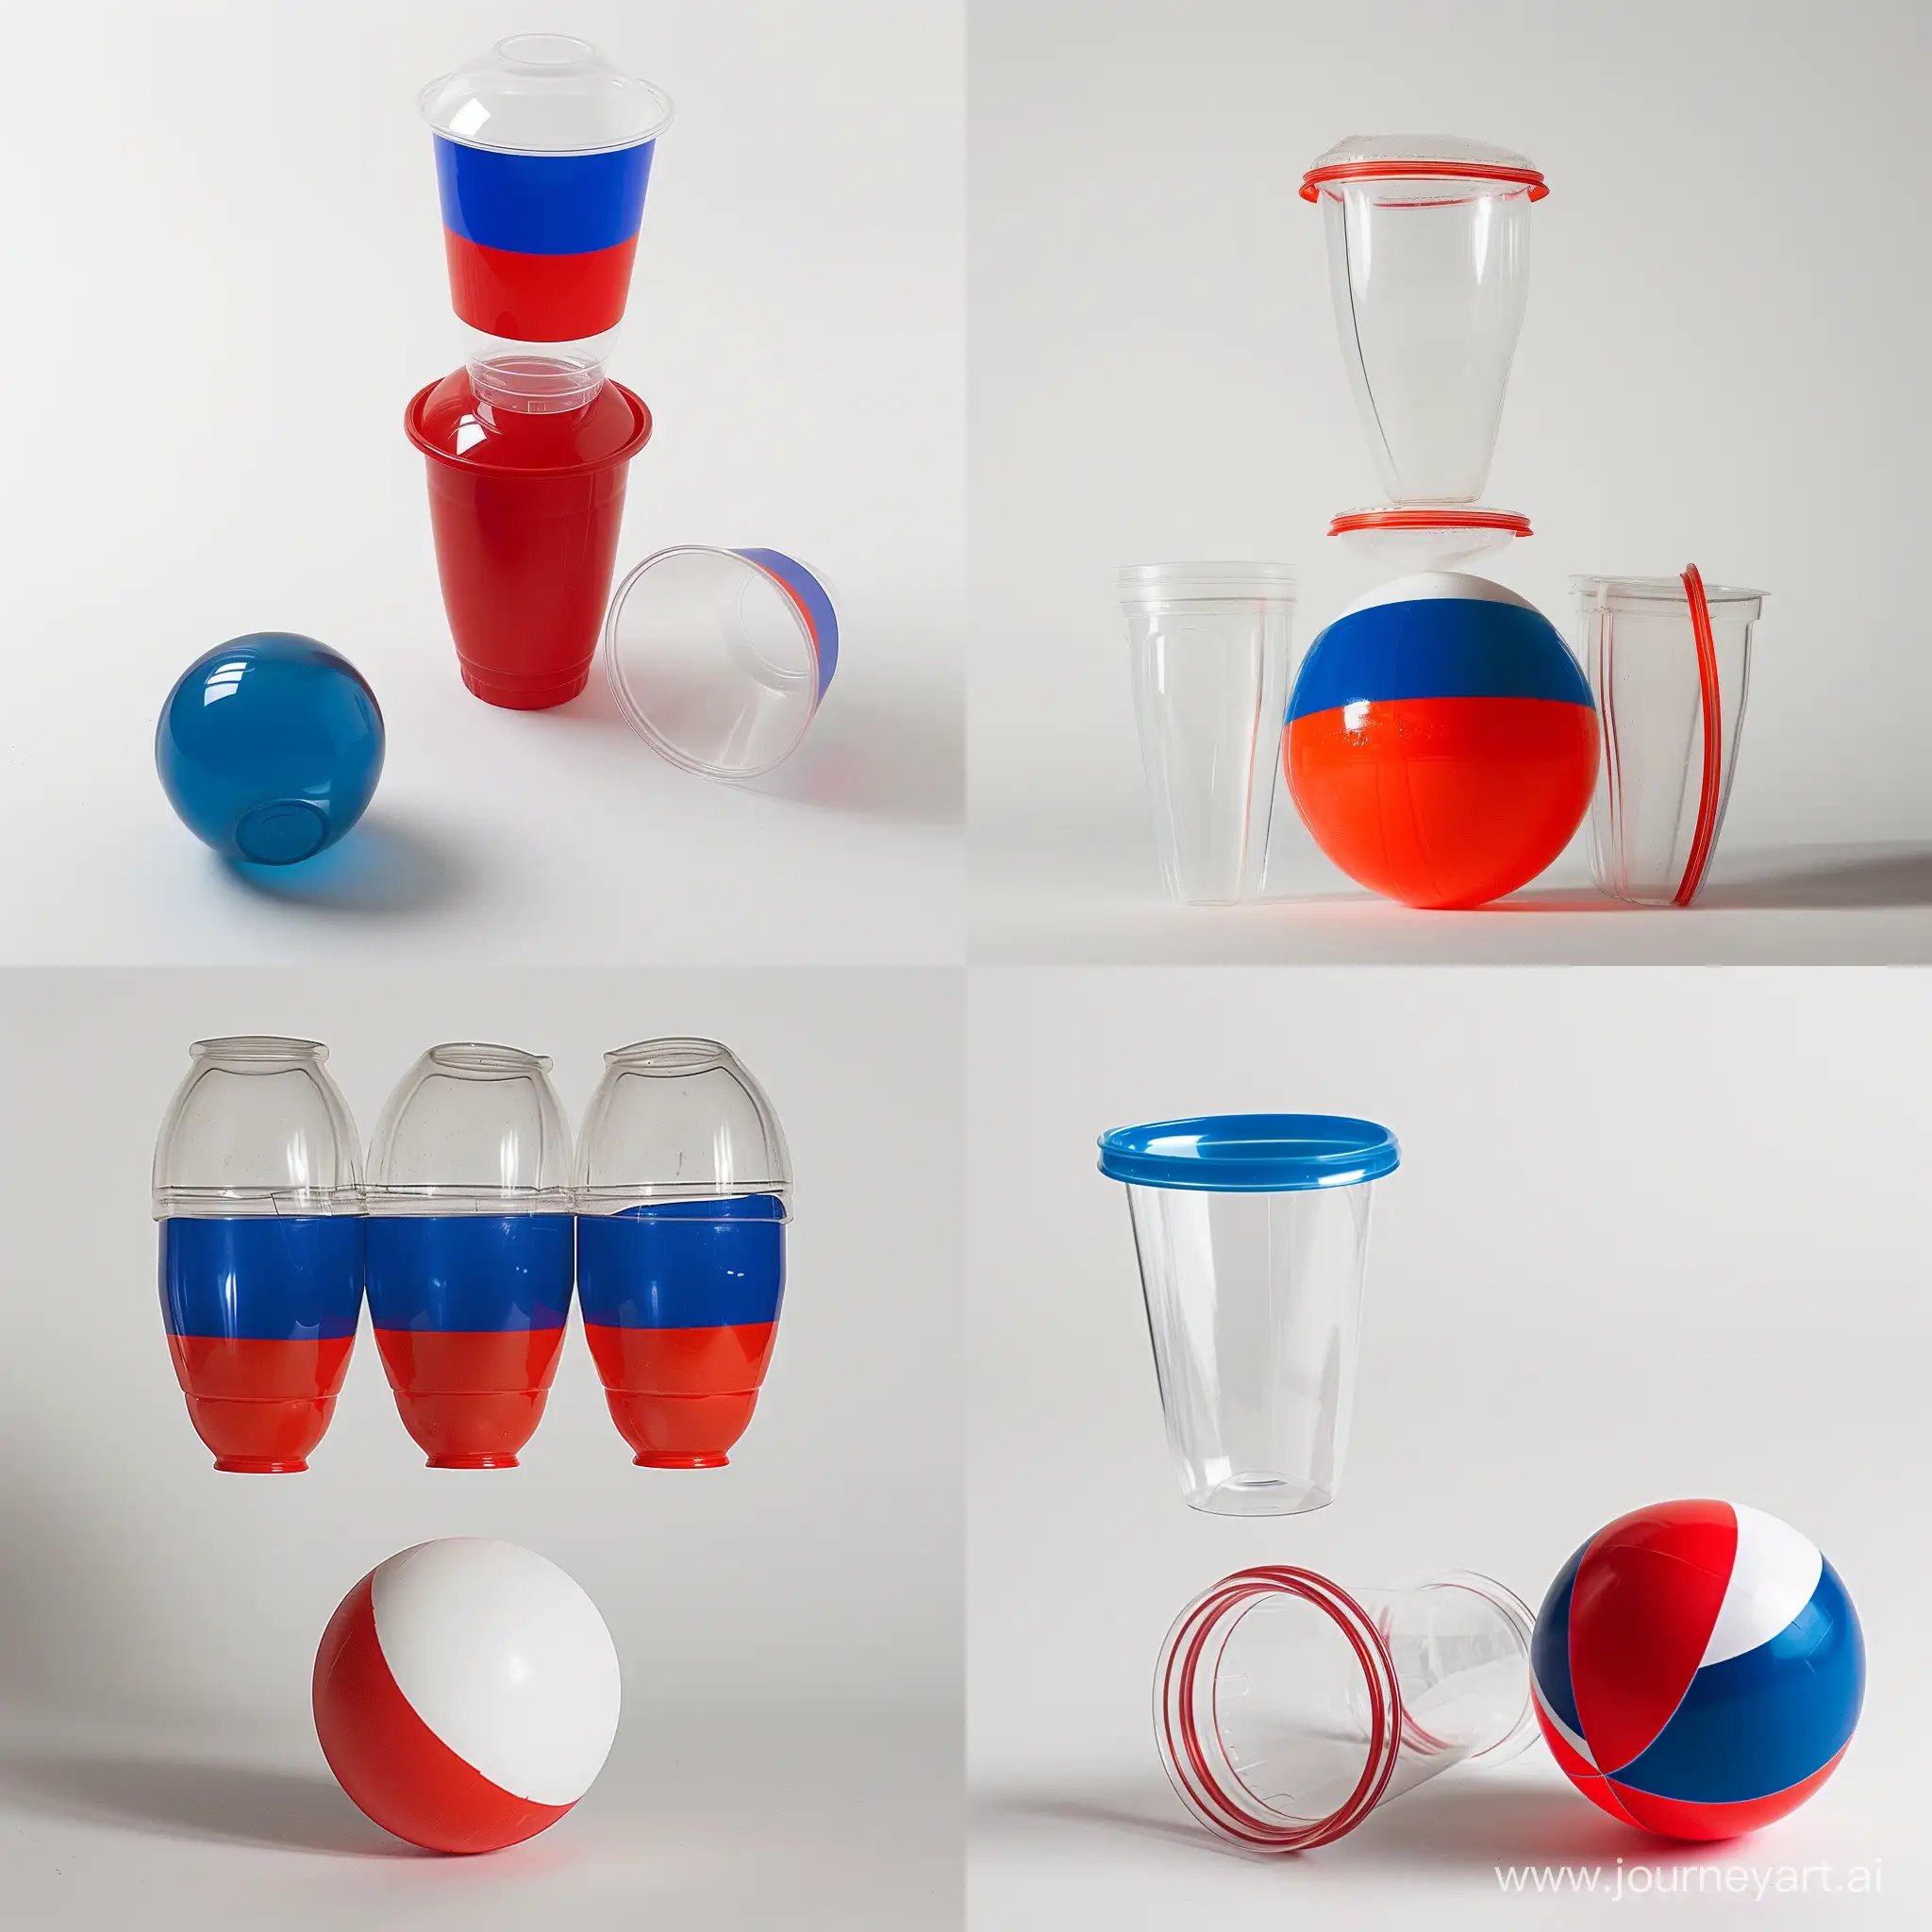 Creative-Tabletop-Soccer-with-Plastic-Cups-and-Russian-Flag-Ball